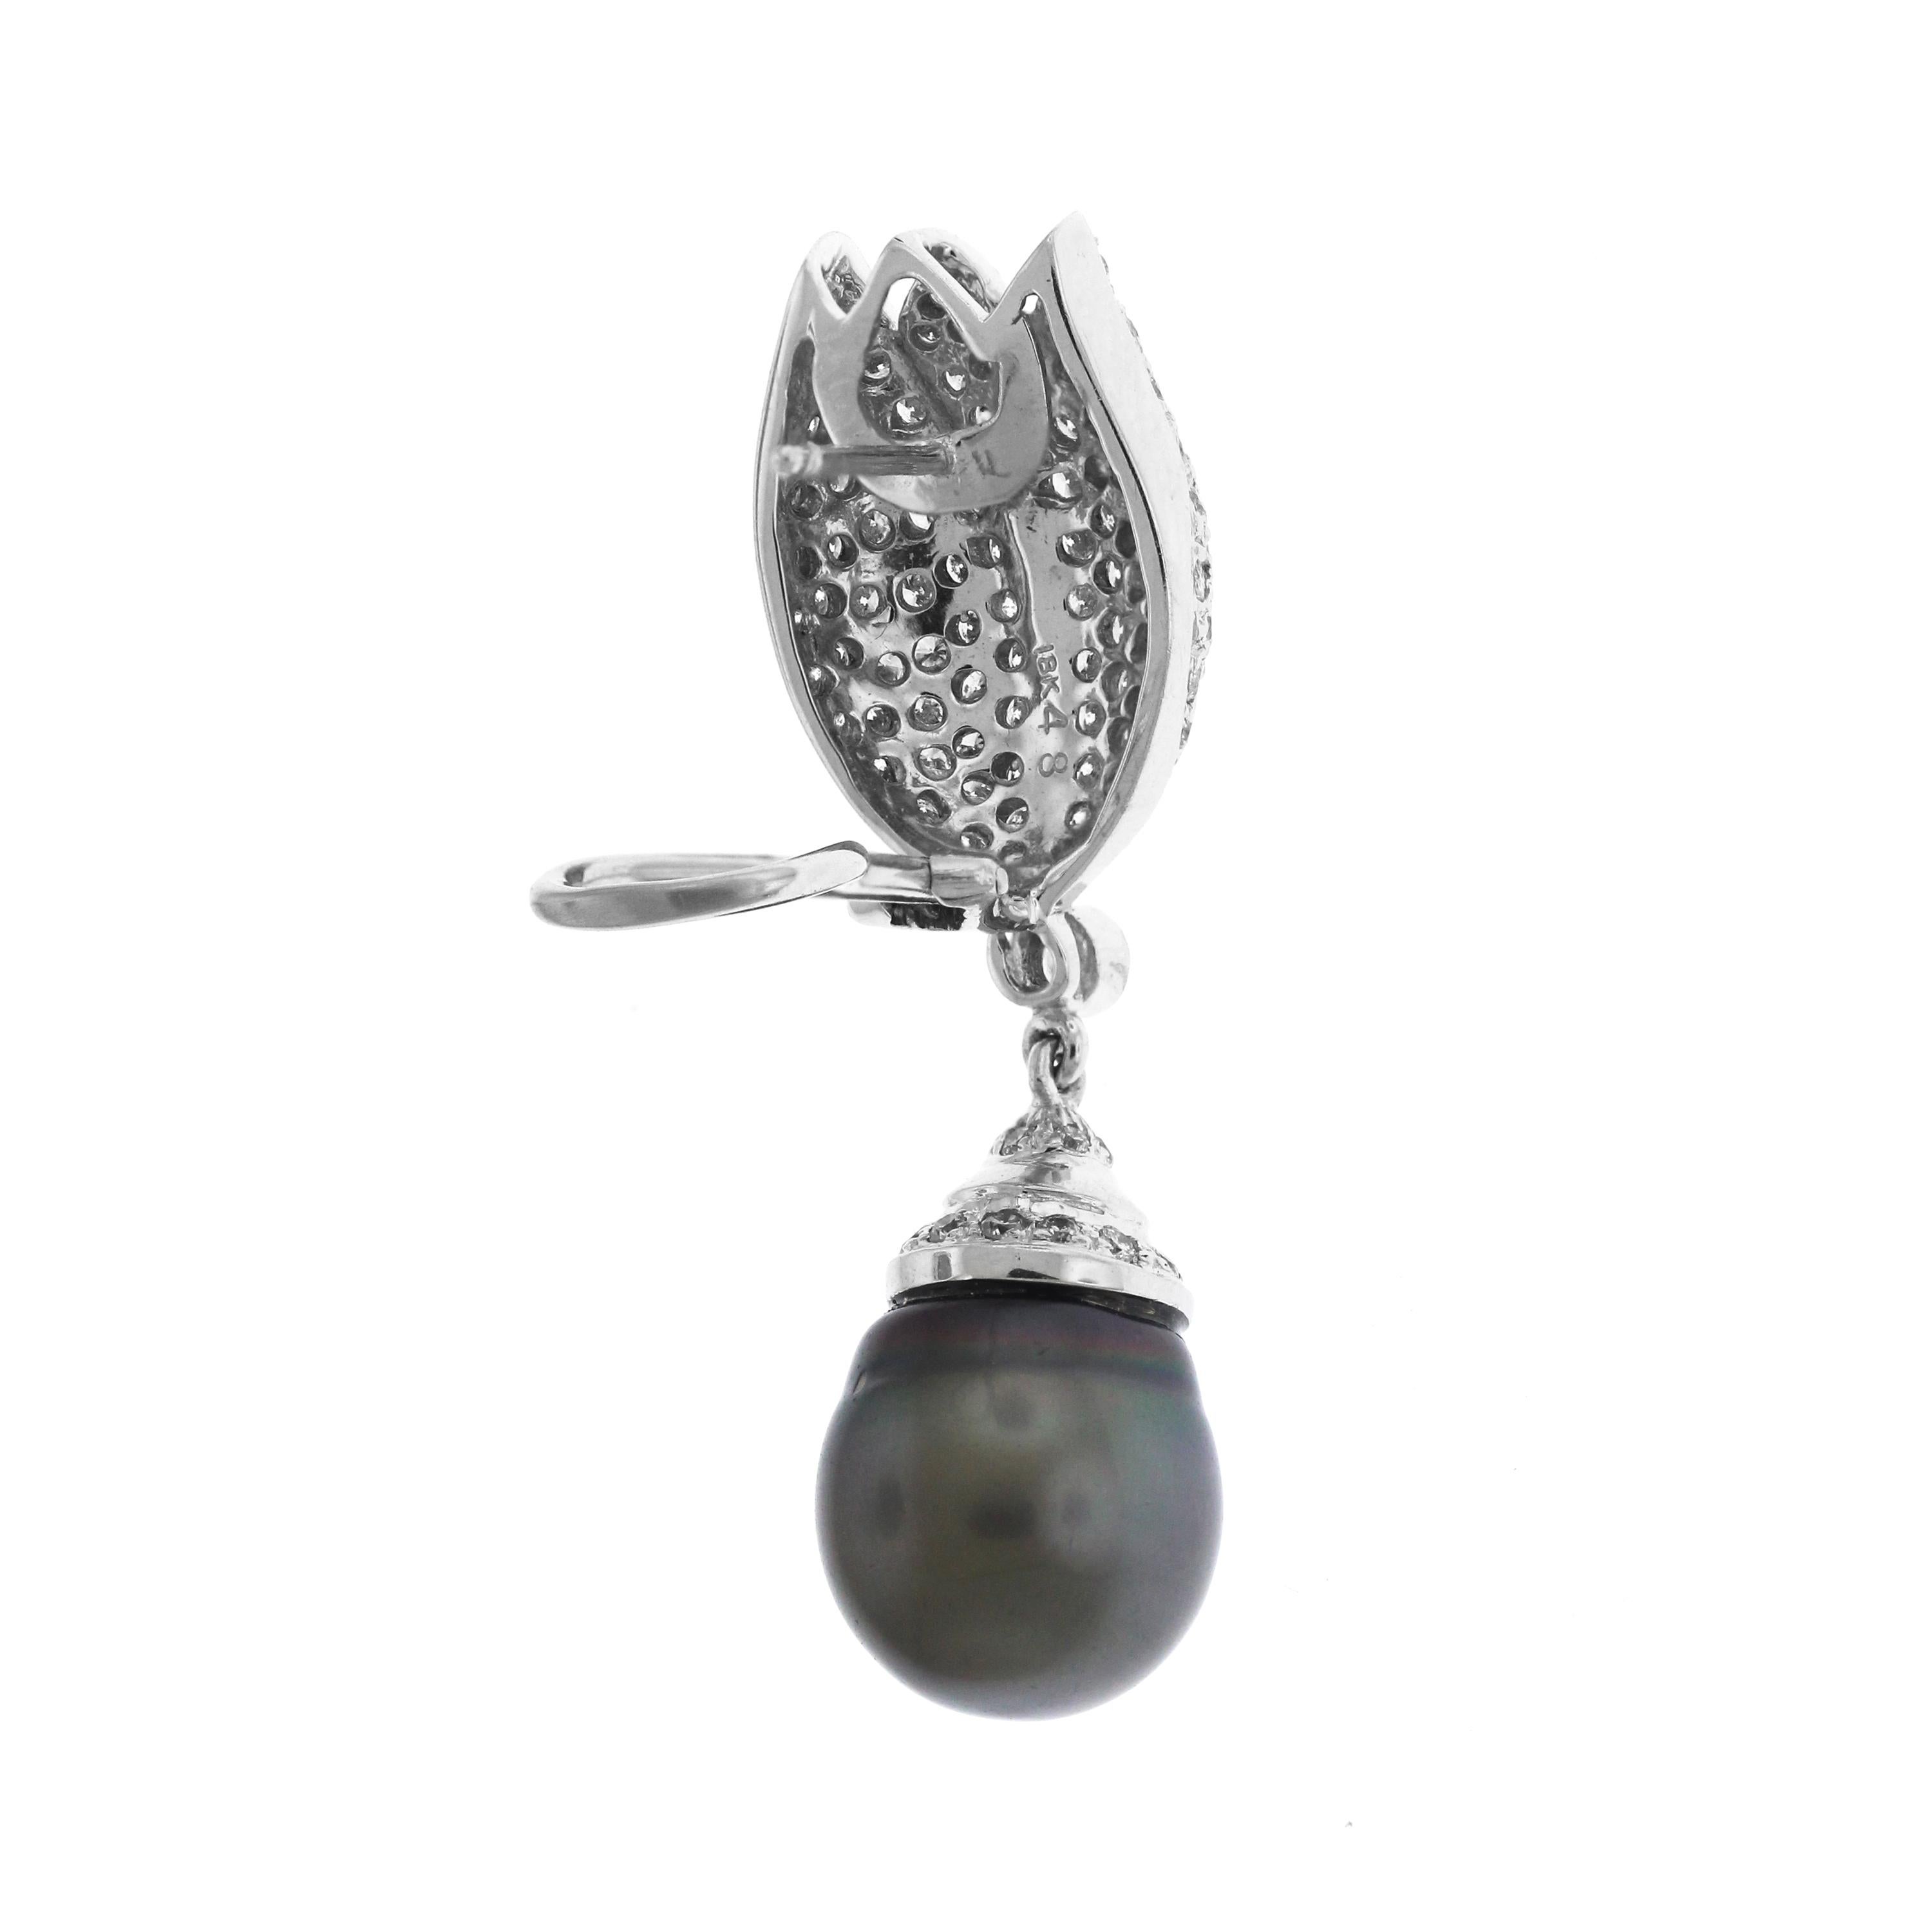 18K White Gold and Diamond Drop Earrings with TahitianBlack Pearls

13mm Tahitian pearl drops

1.50 carat H color, SI clarity diamonds 

Post-omega backs

Earrings are 1.9 inches length x 0.6 inch width